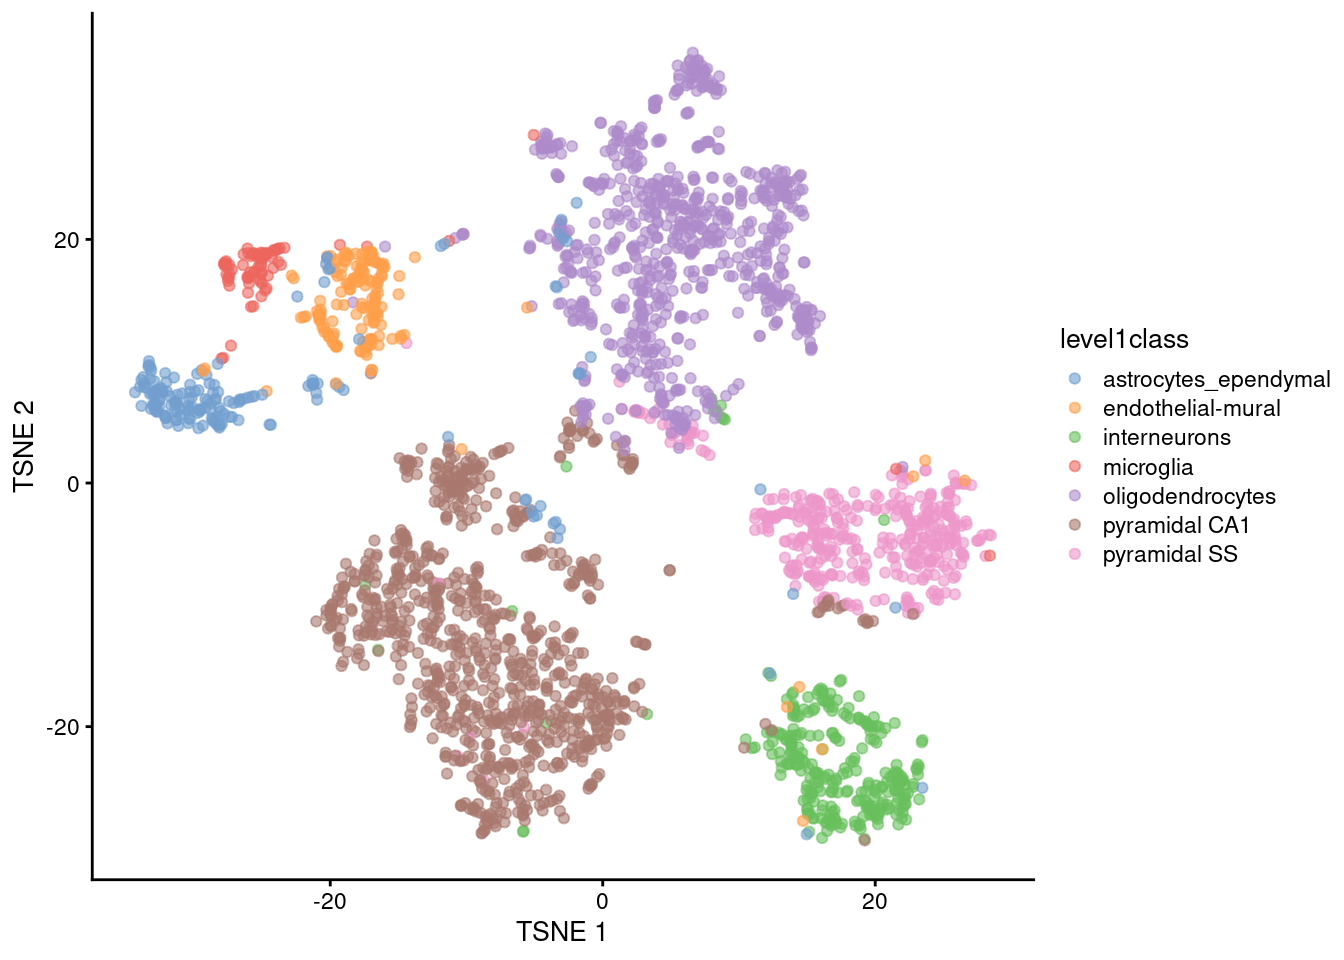 $t$-SNE plots constructed from the top PCs in the Zeisel brain dataset. Each point represents a cell, coloured according to the published annotation.